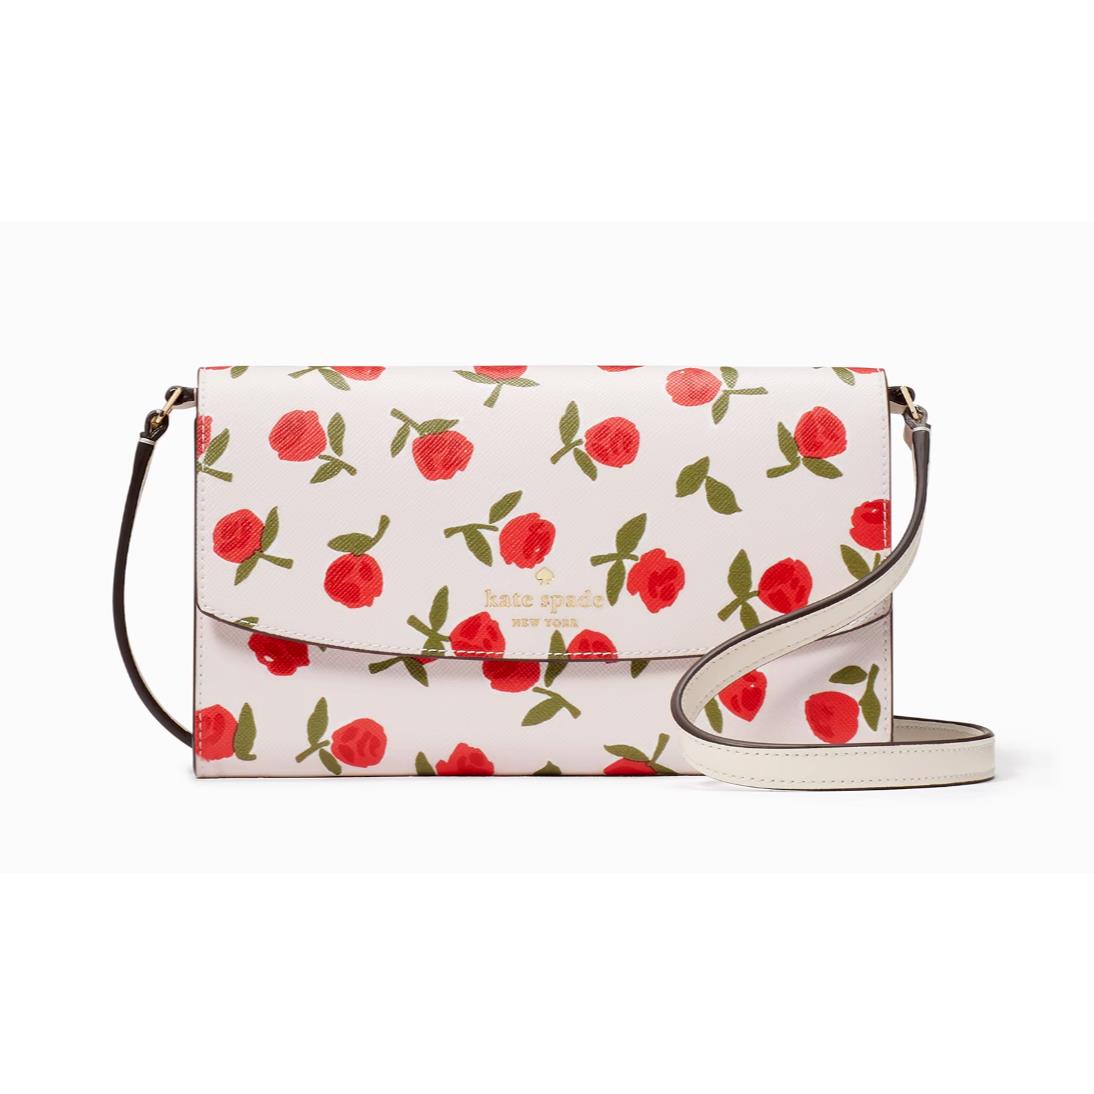 New Kate Spade Dana Small Flap Crossbody Saffiano Floral Multi with Dust Bag